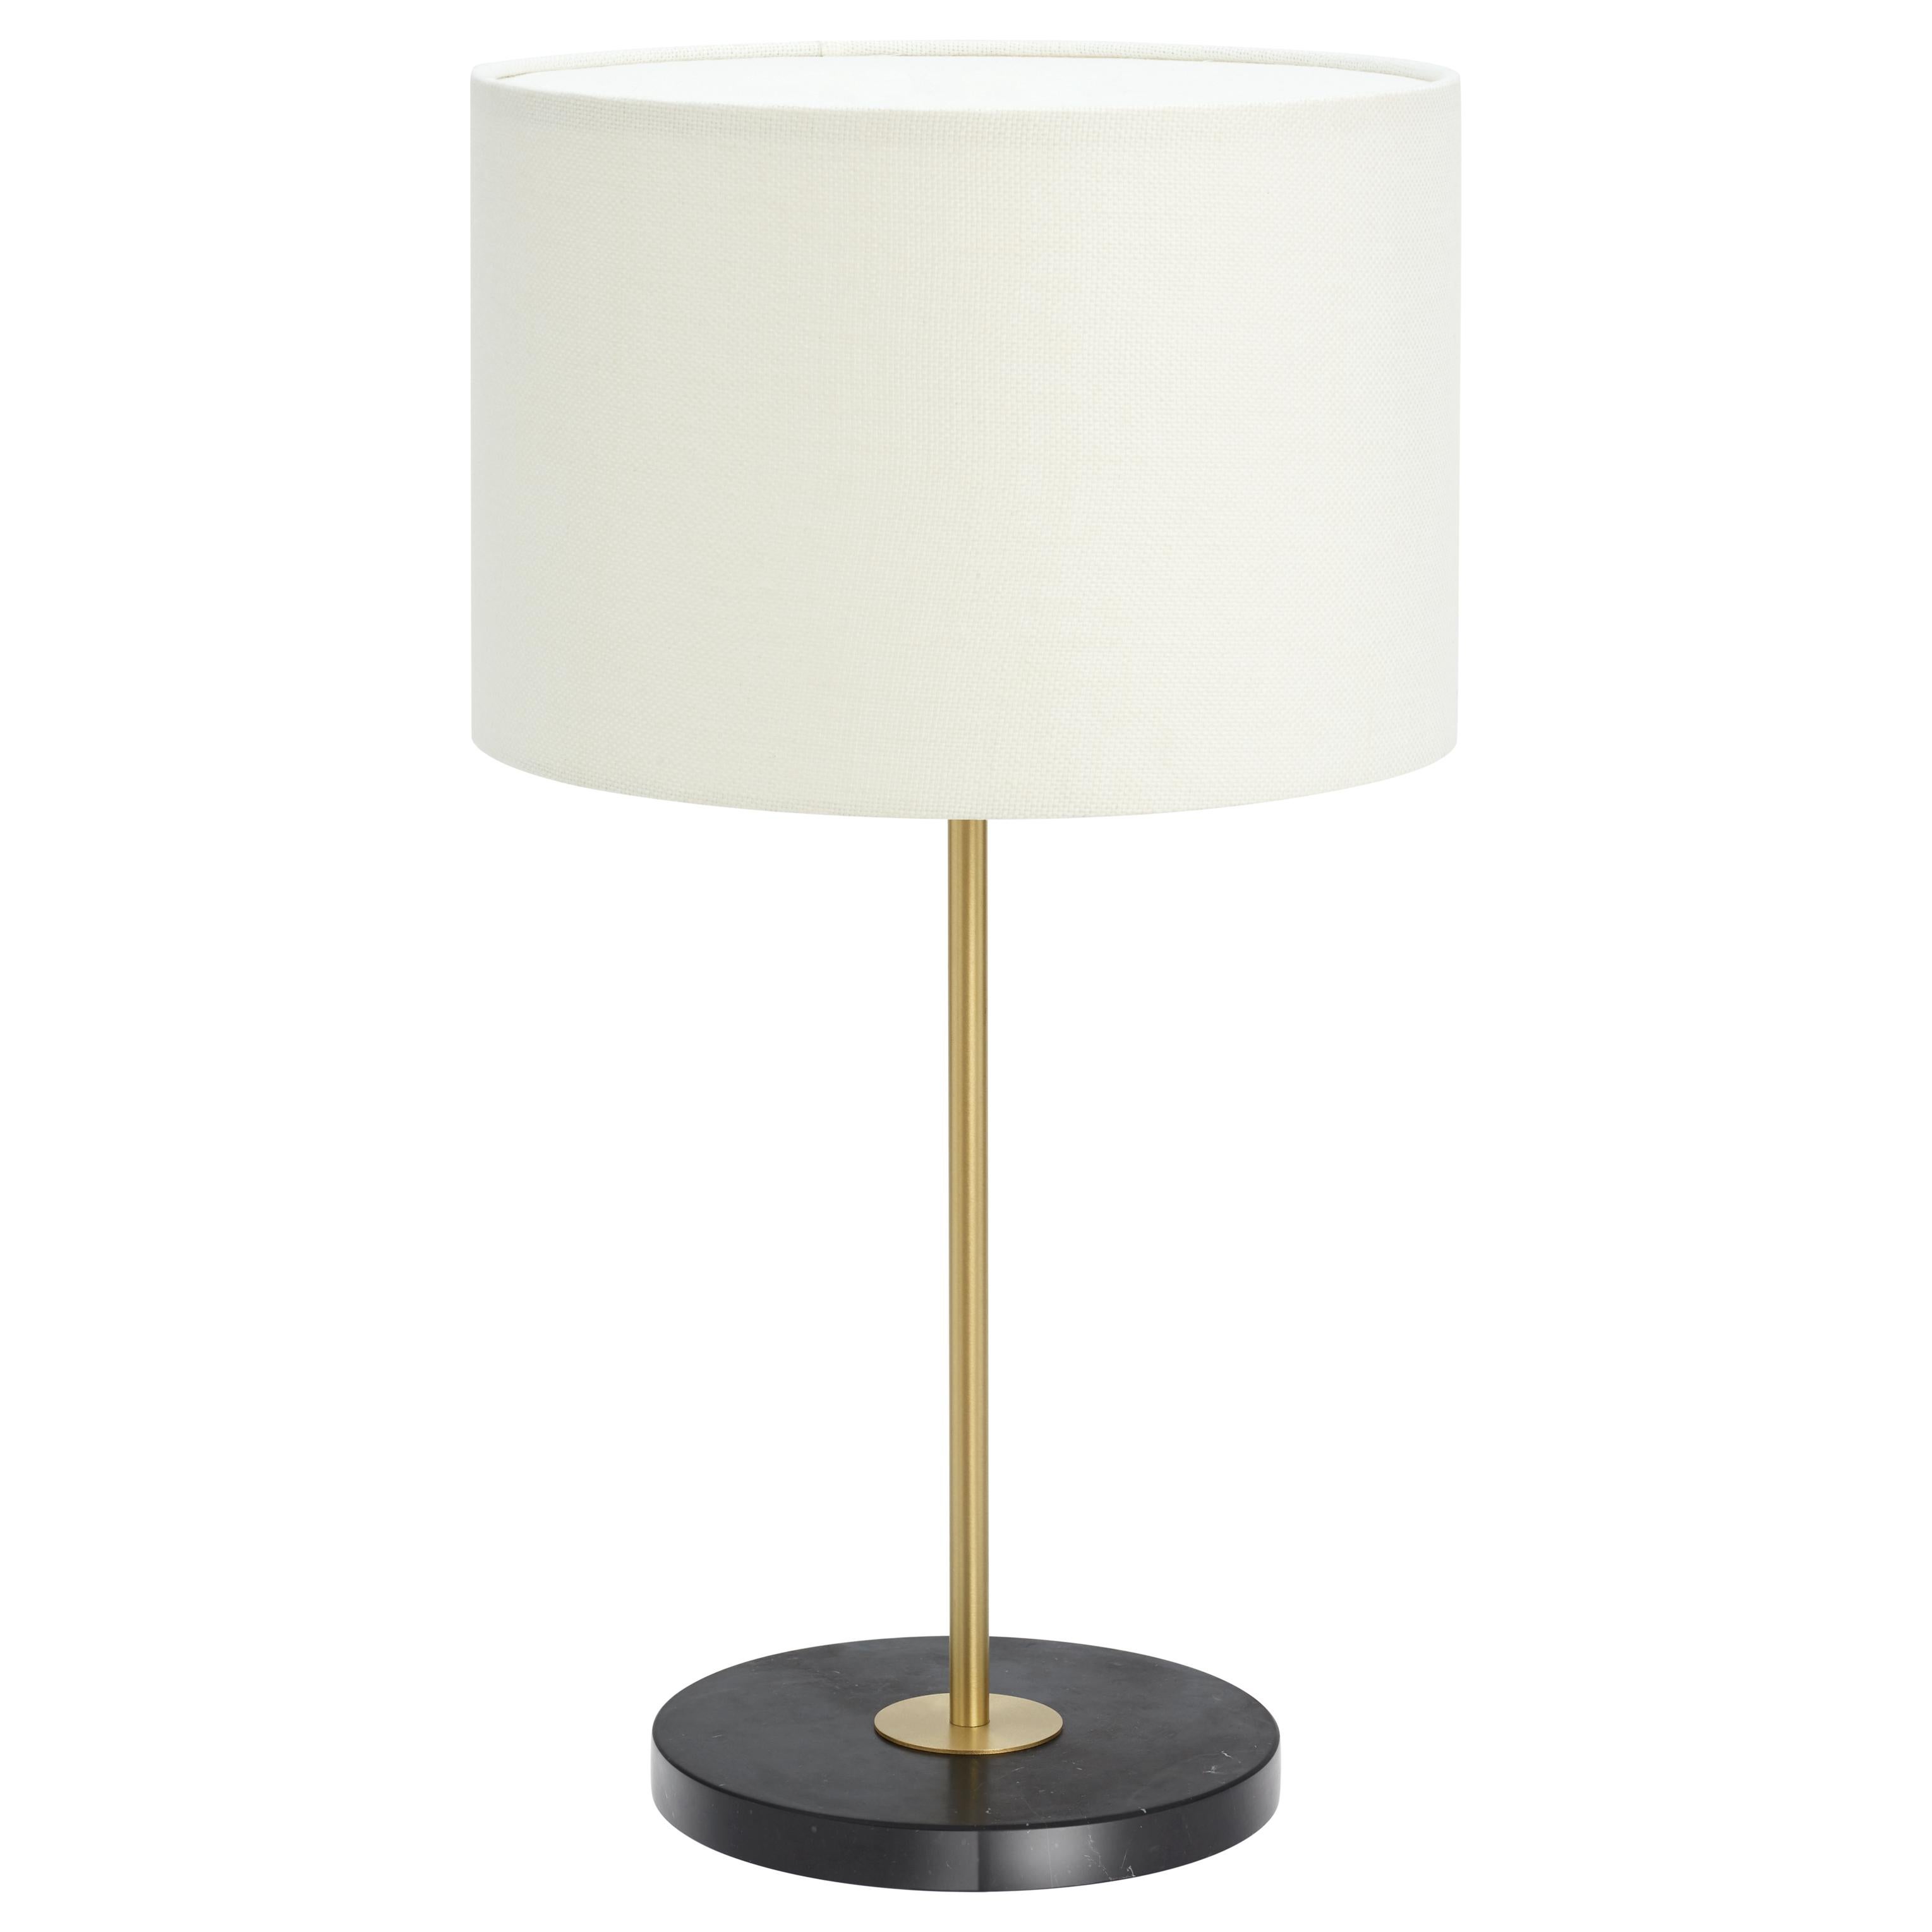 Black Marquina marble Mayfair table lamp by CTO Lighting
Materials: Polished black Marquina marble base with satin brass and white linen shade
Dimensions: 29 x H 66 cm

All our lamps can be wired according to each country. If sold to the USA it